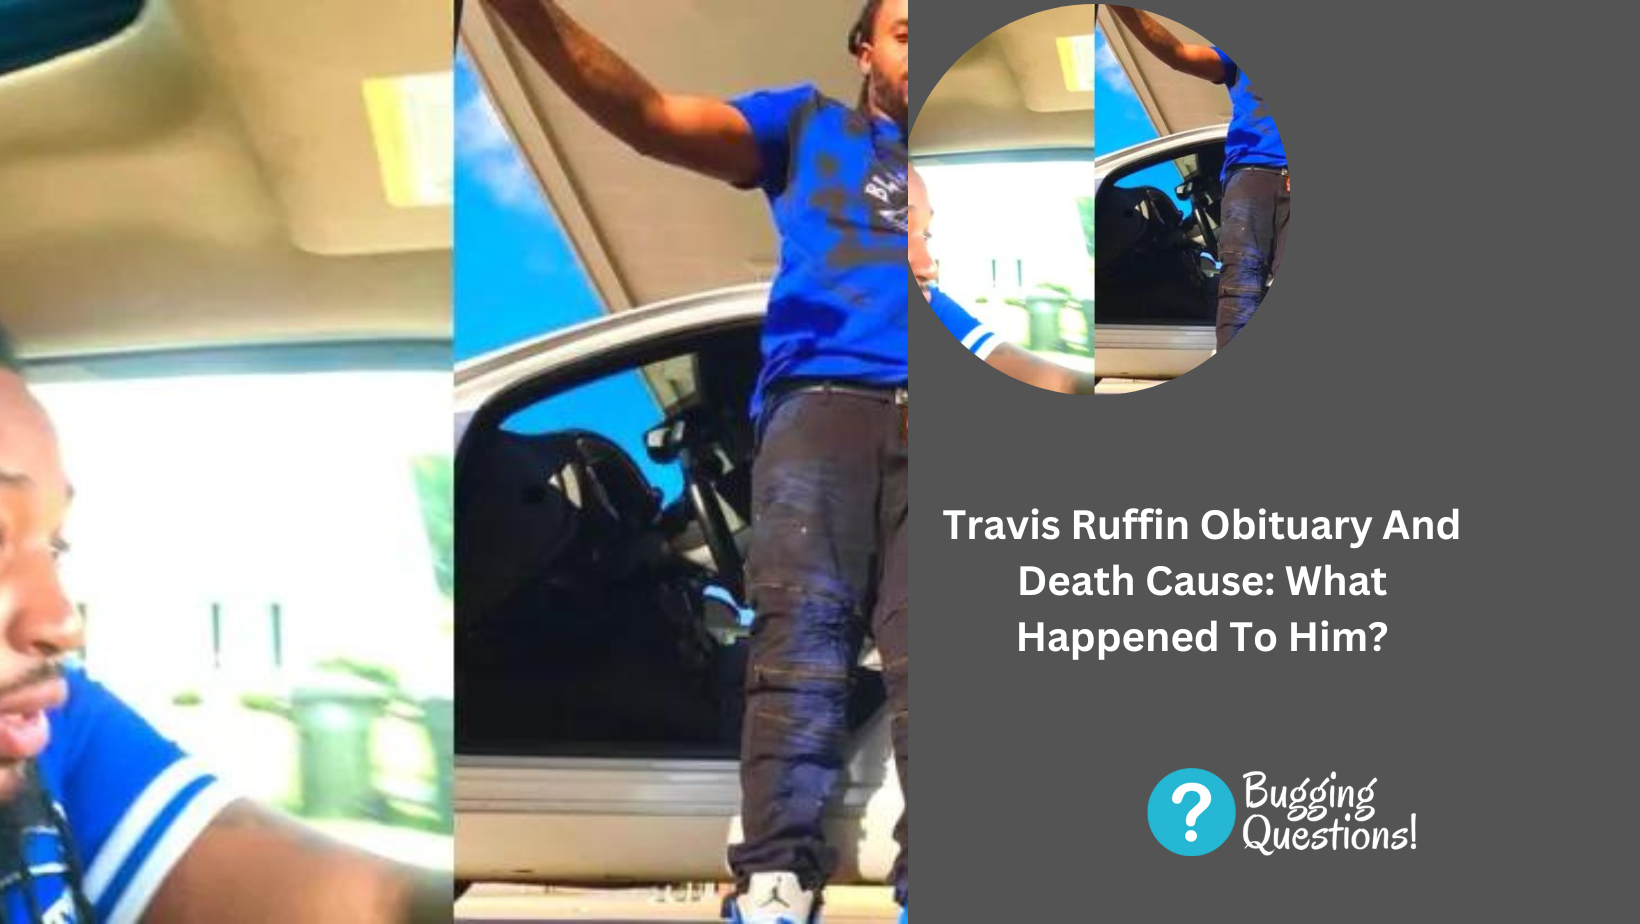 Travis Ruffin Obituary And Death Cause: What Happened To Him?